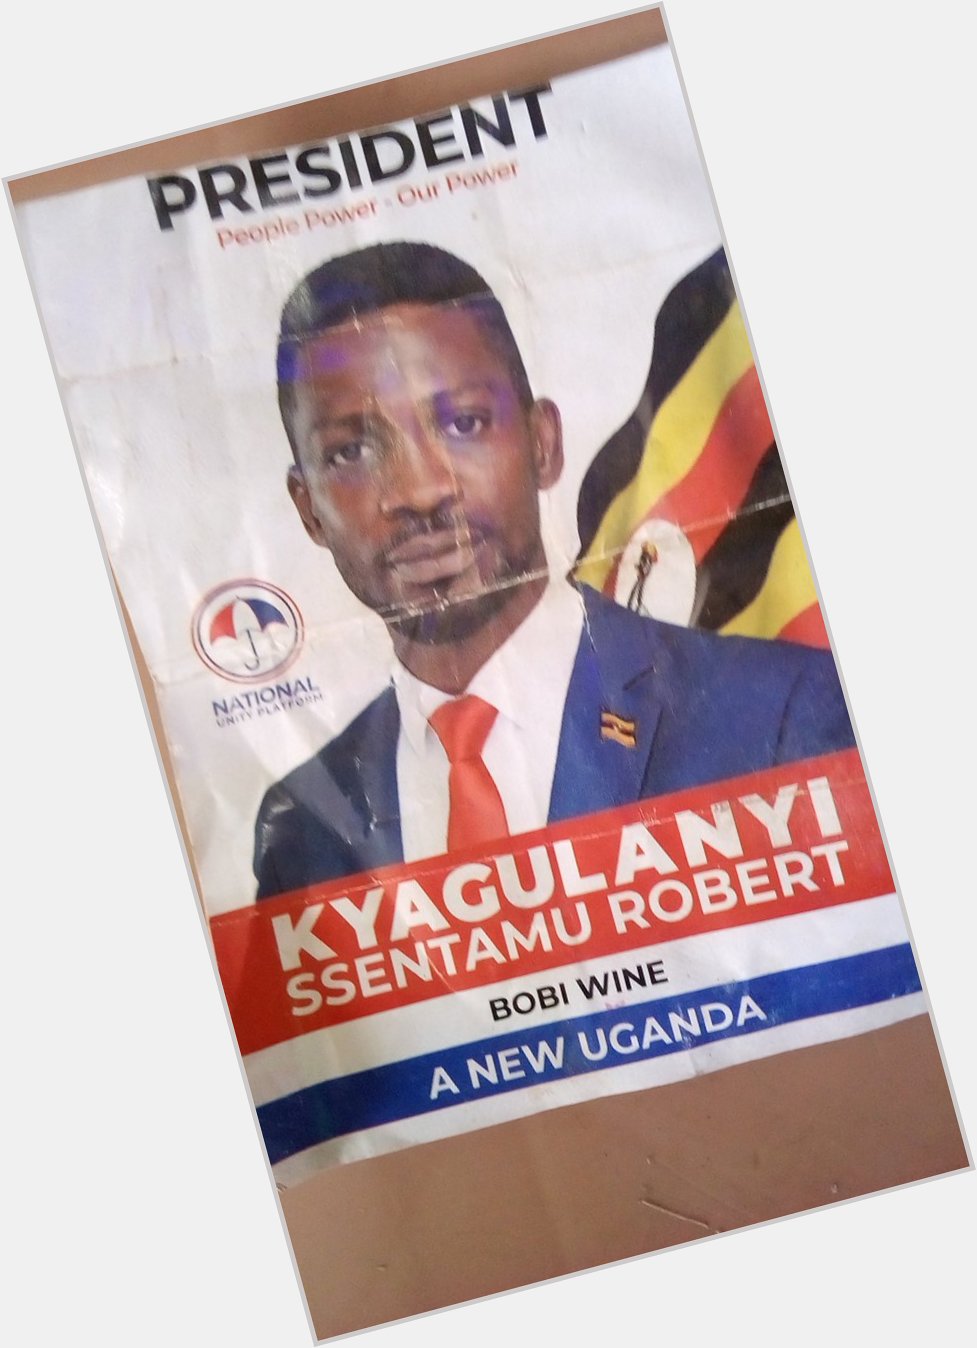 Happy birthday to you Bobi Wine more years of experience and blessings. 